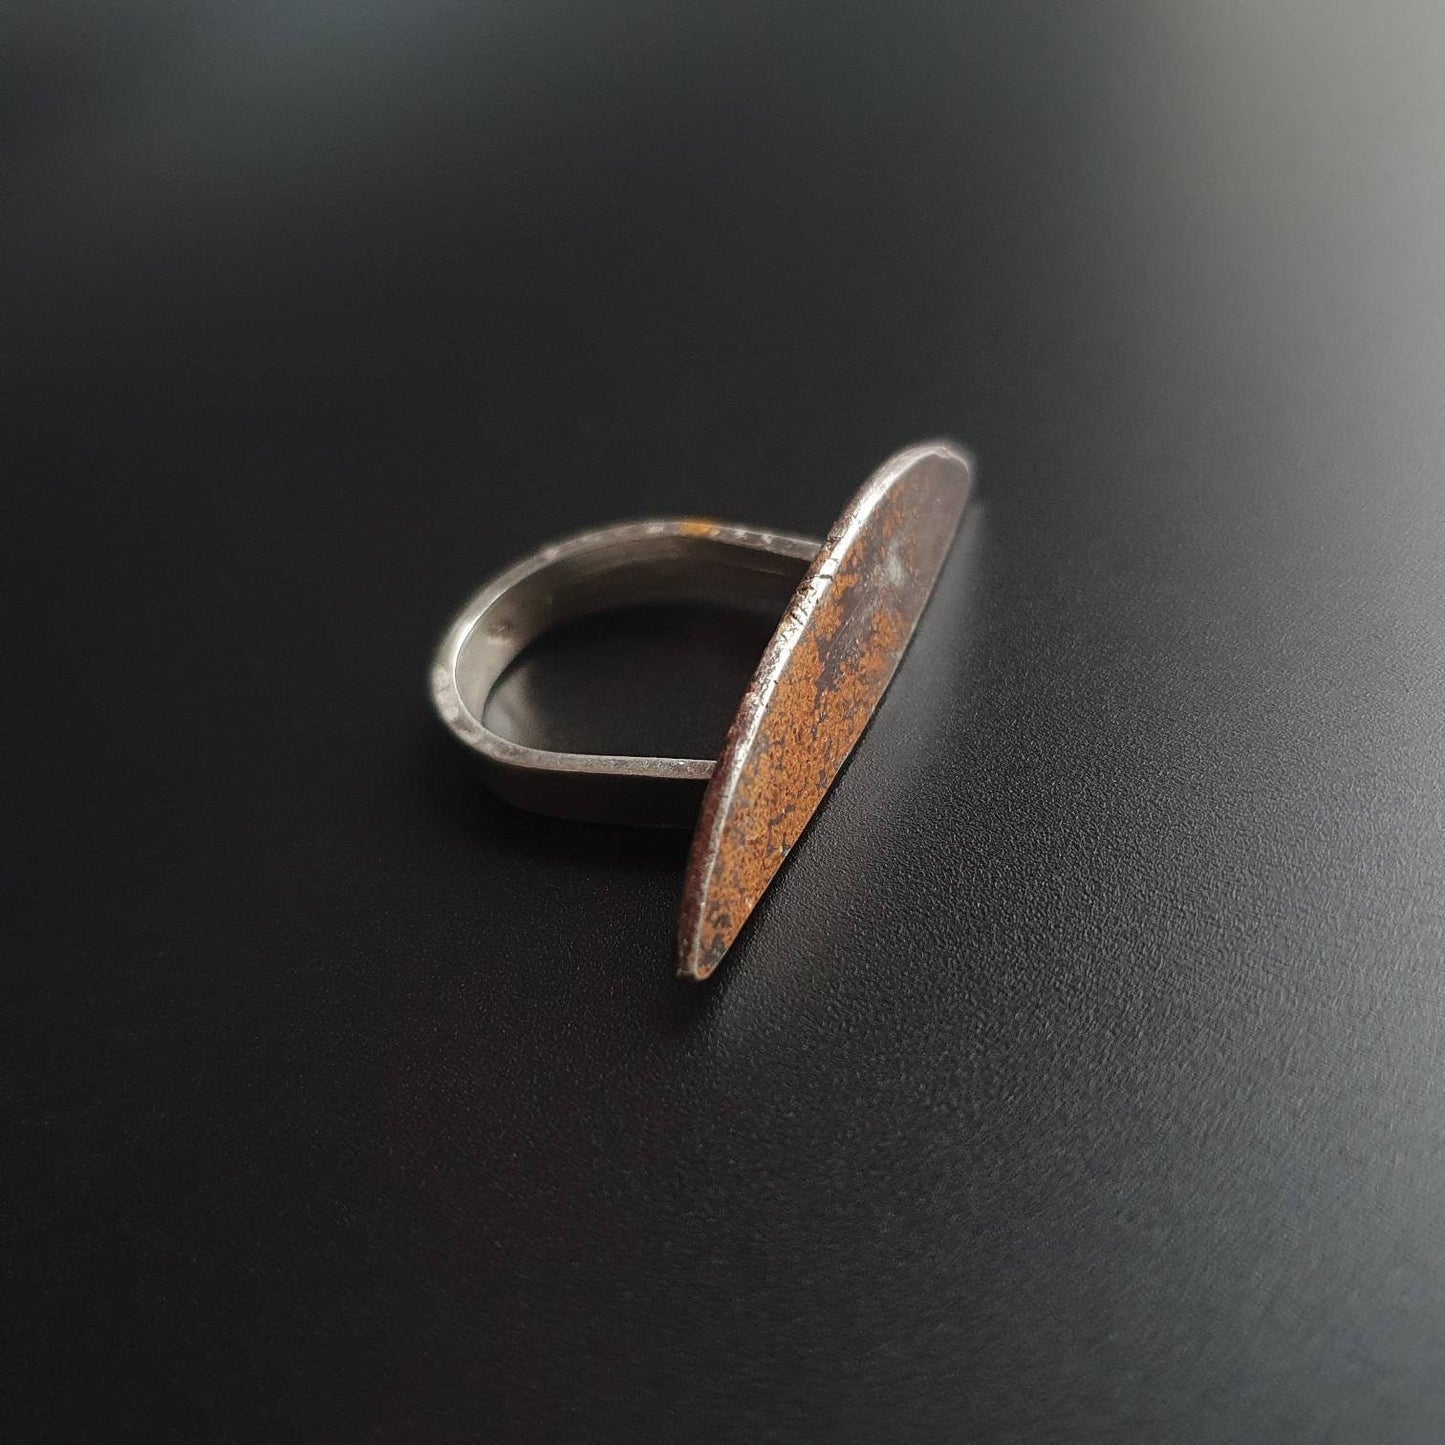 Sterling silver ring, statement ring, sterling silver jewelry, unusual gifts for all, unisex, unique jewelry, brutalist,art, artistic design